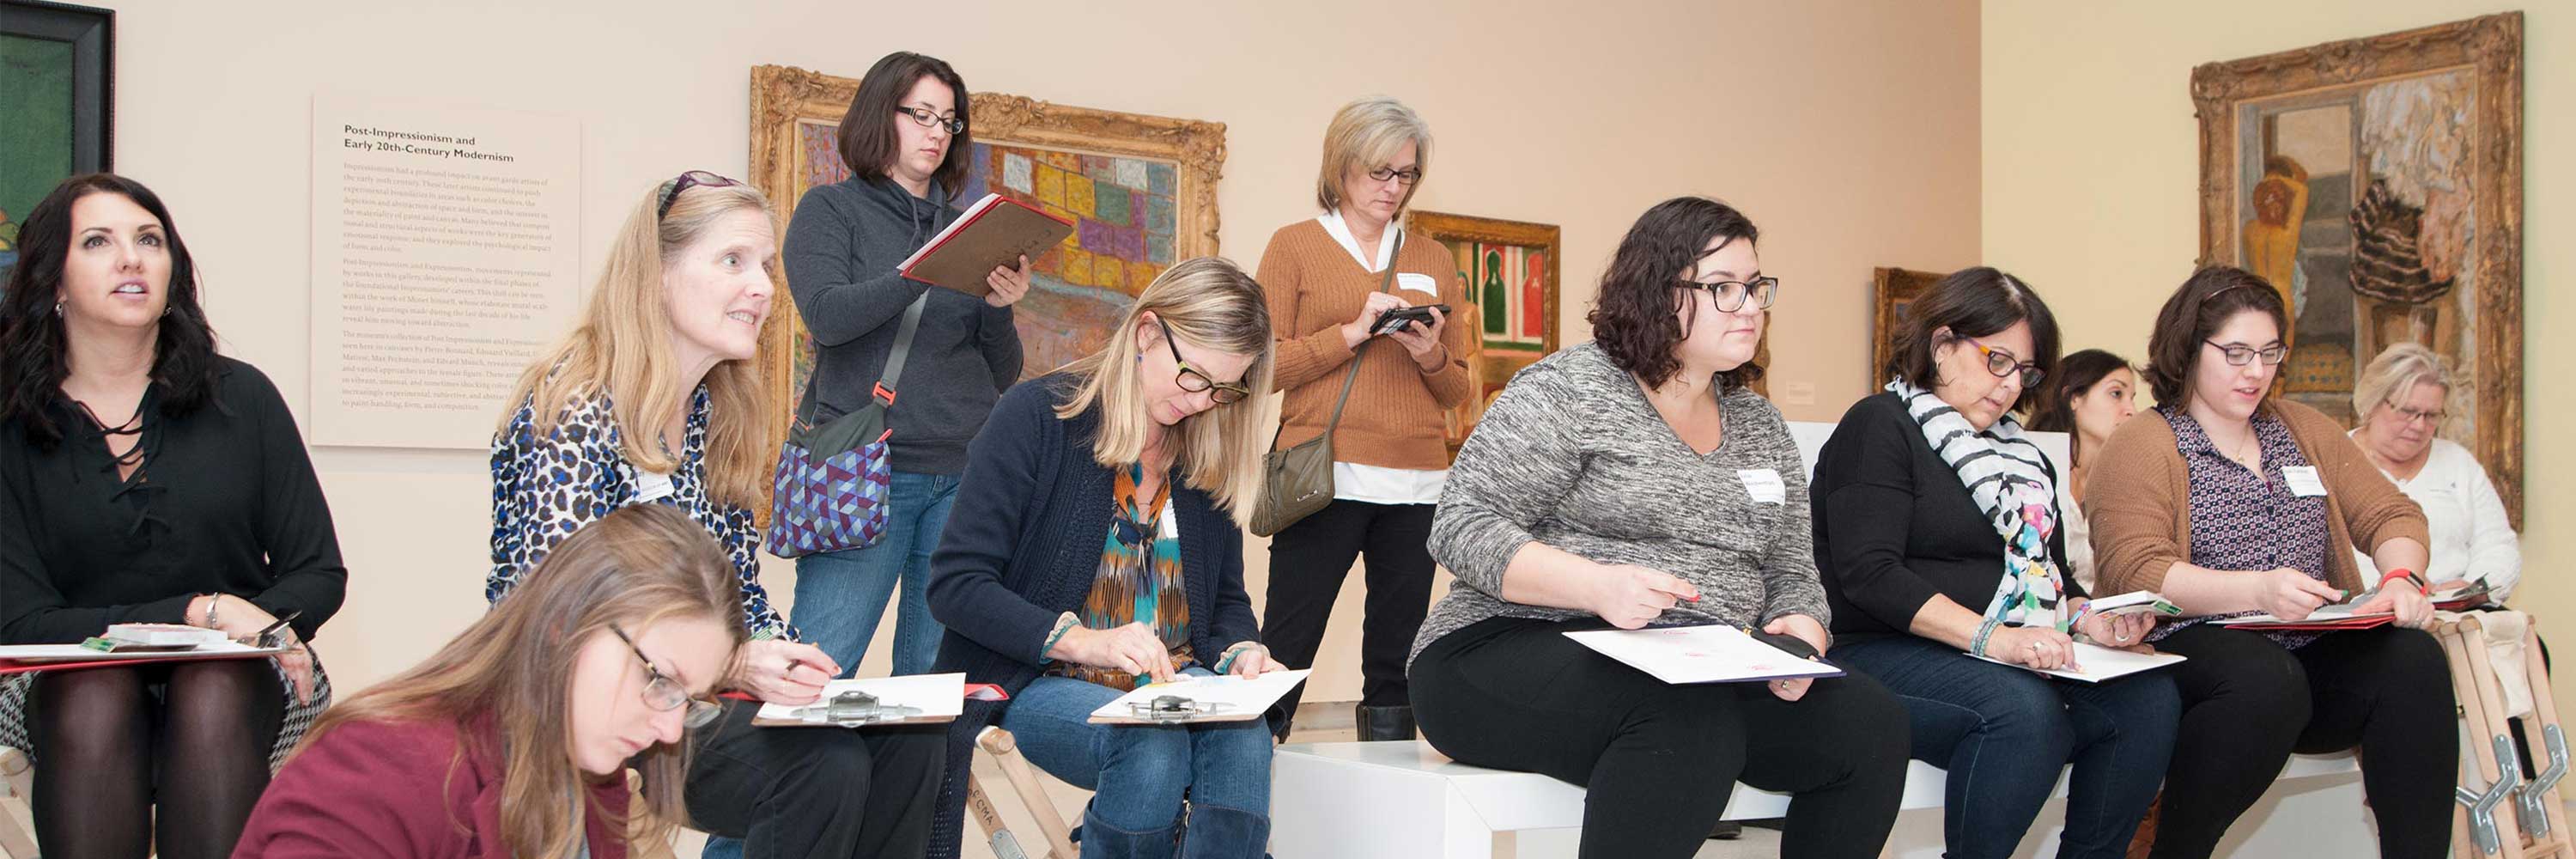 A group of women writing or drawing on clipboards inside of an art museum.